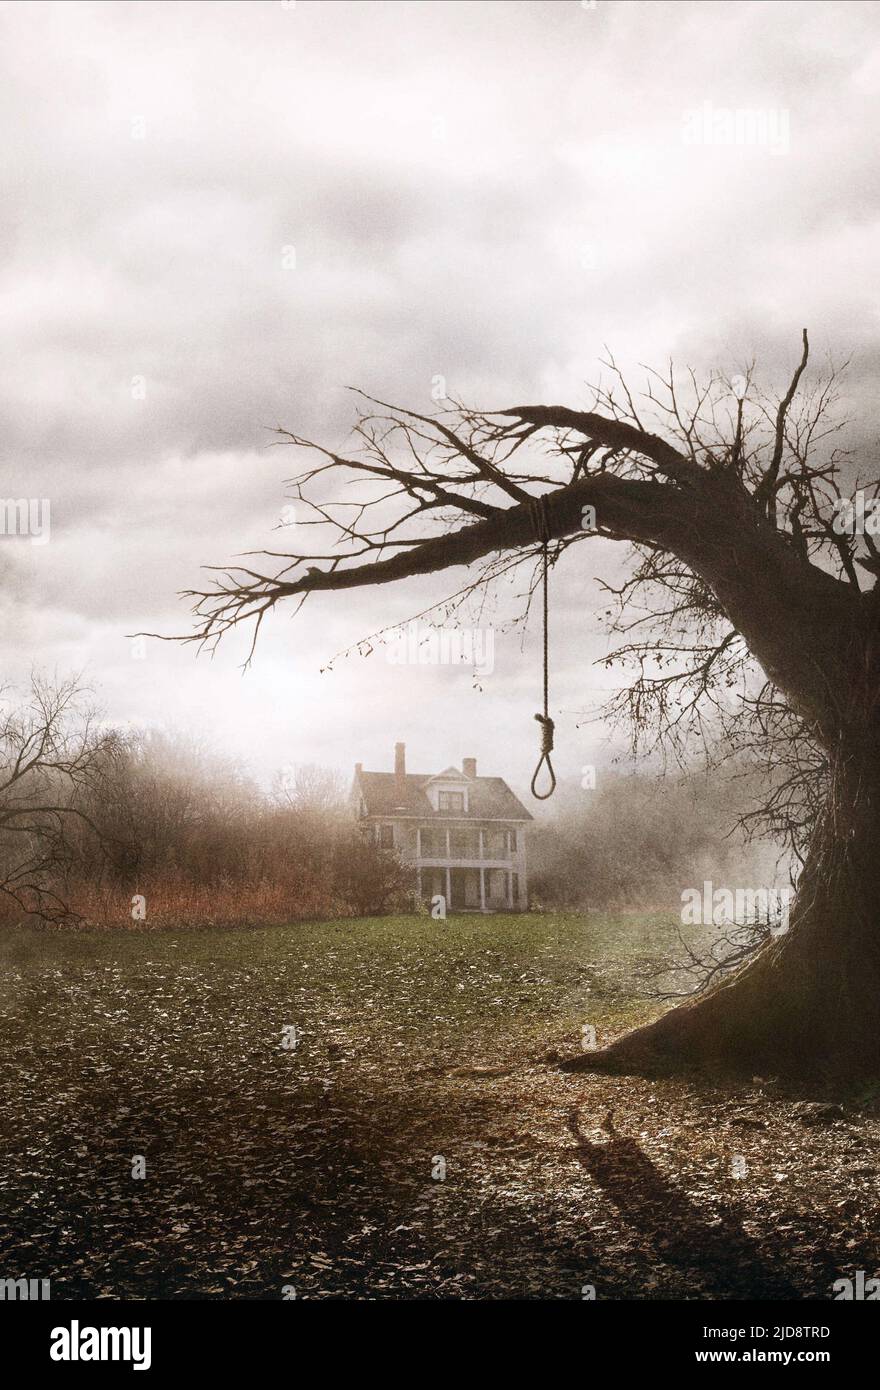 The conjuring hi-res stock photography and images - Alamy